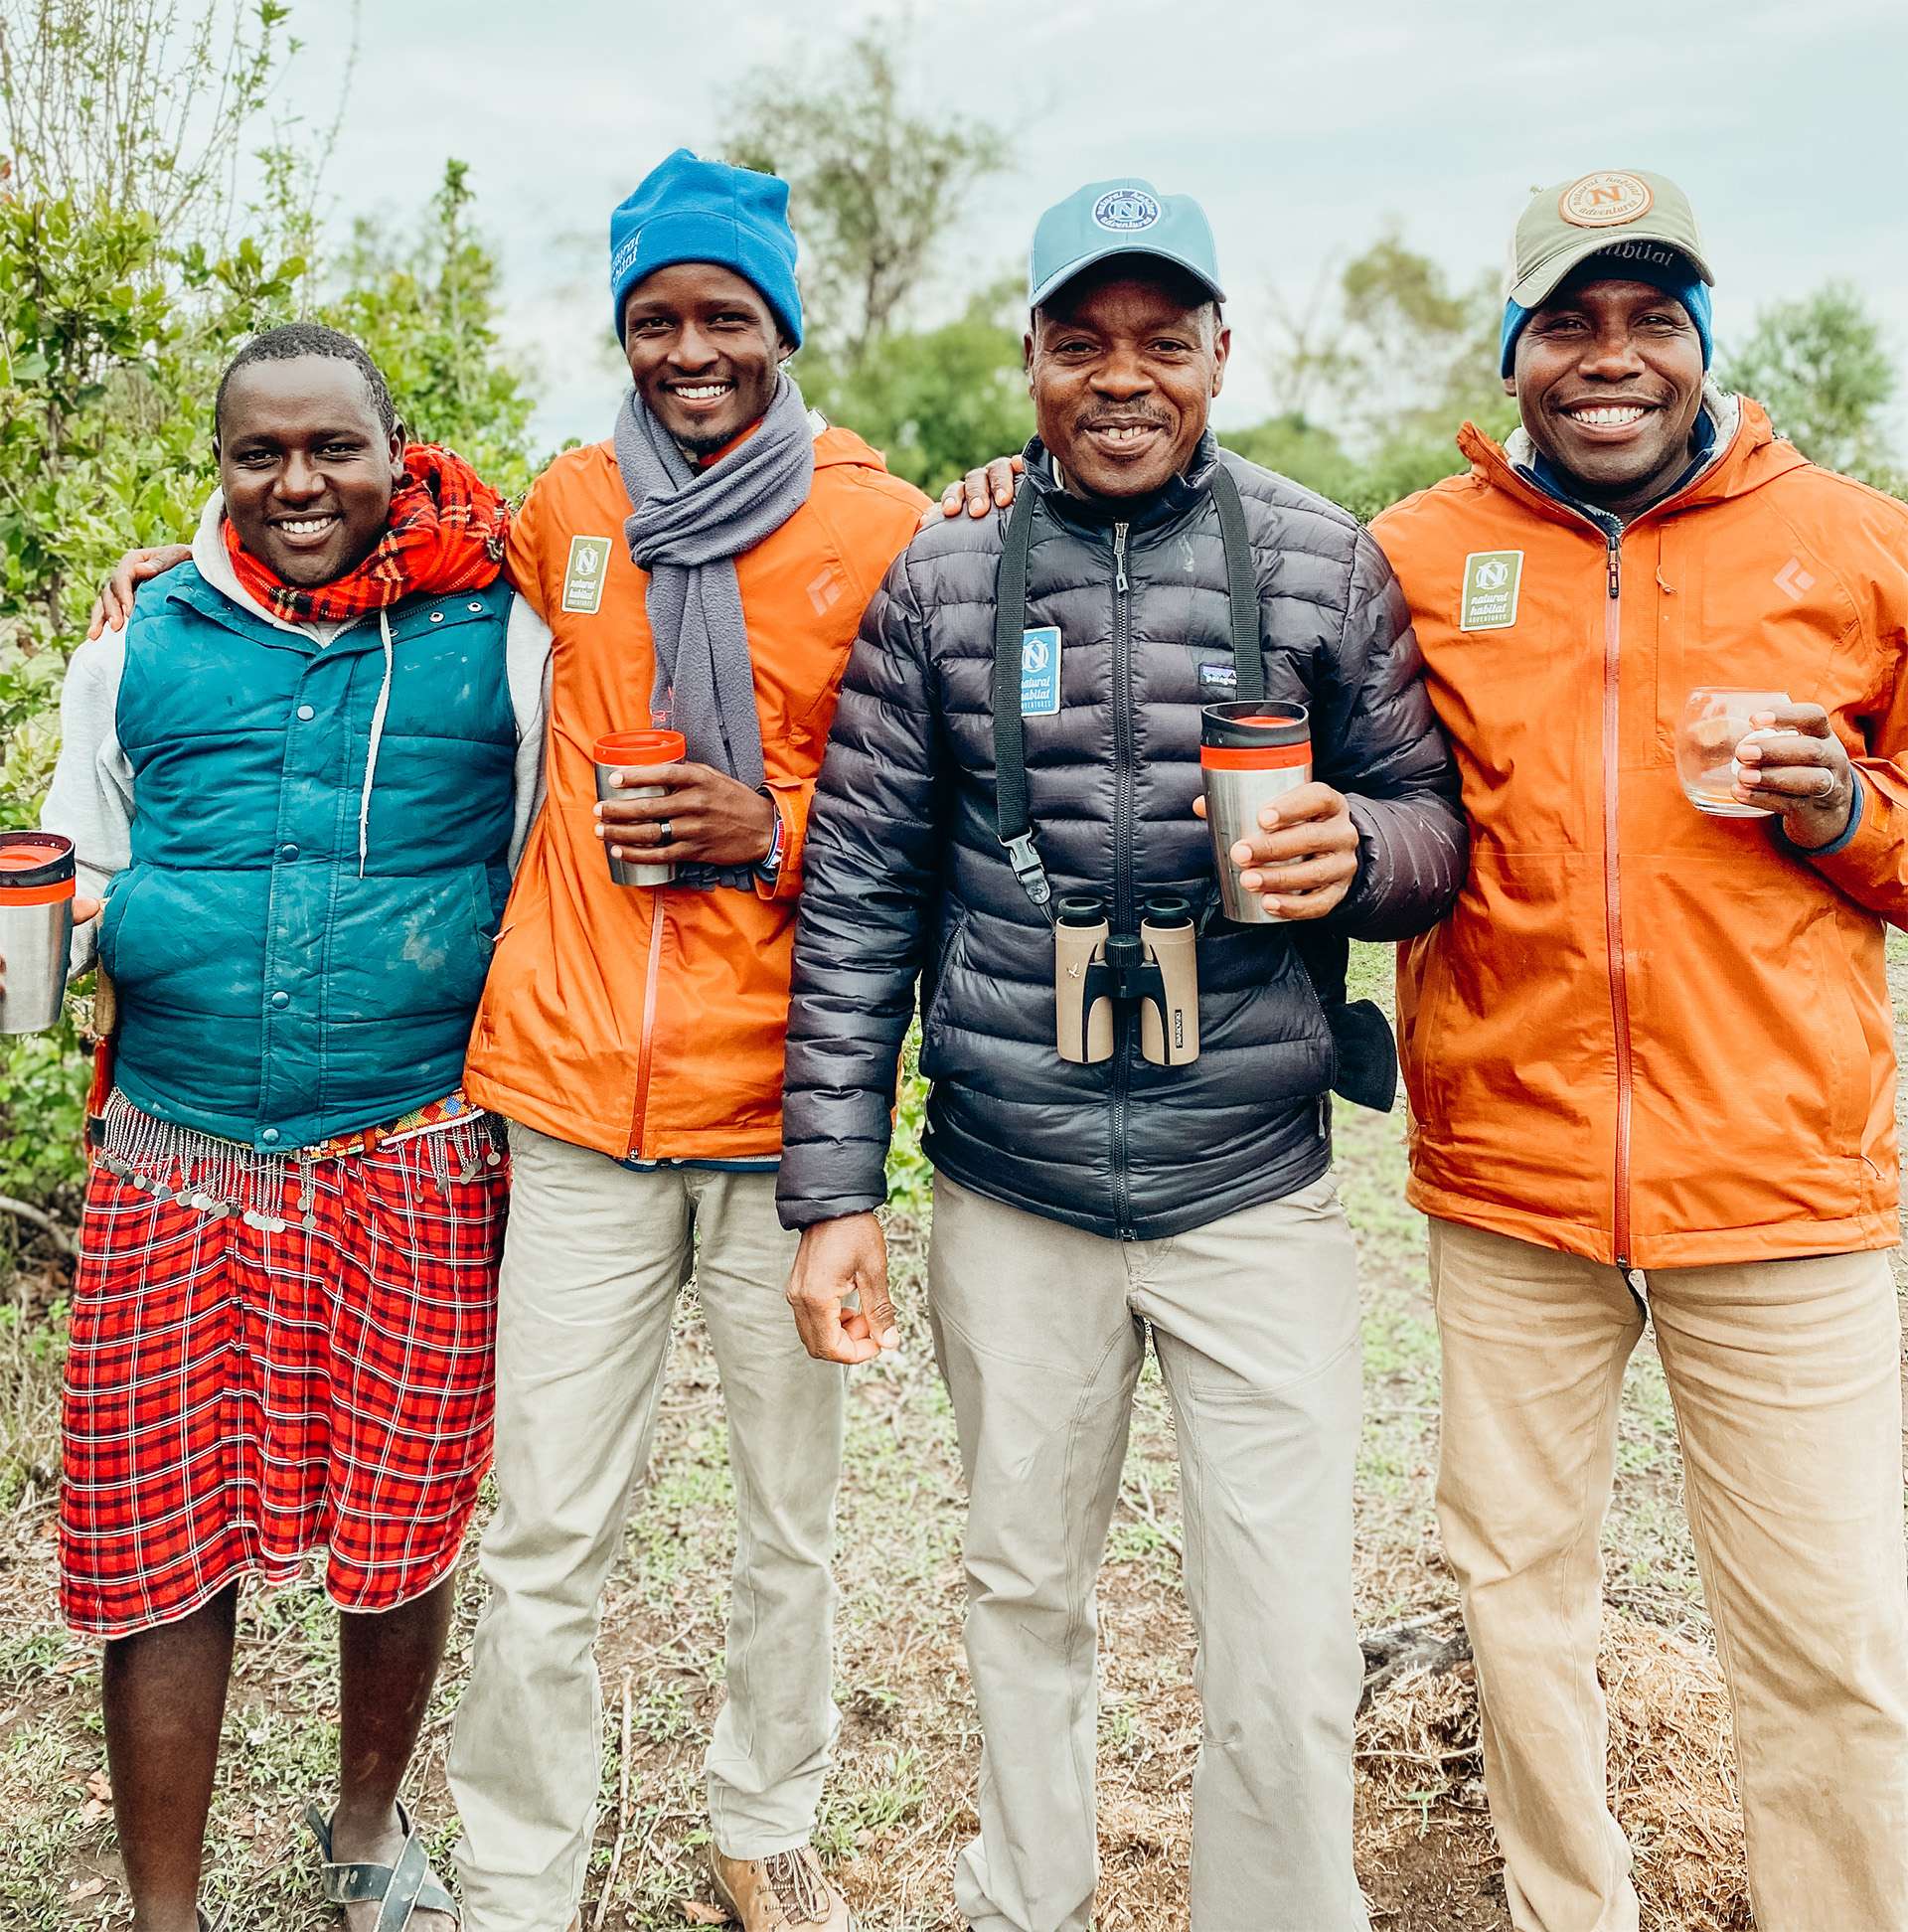 Nat Hab & WWF Expedition Leaders are often members of their local communities! This cheerful group celebrates important conservation work in East Africa